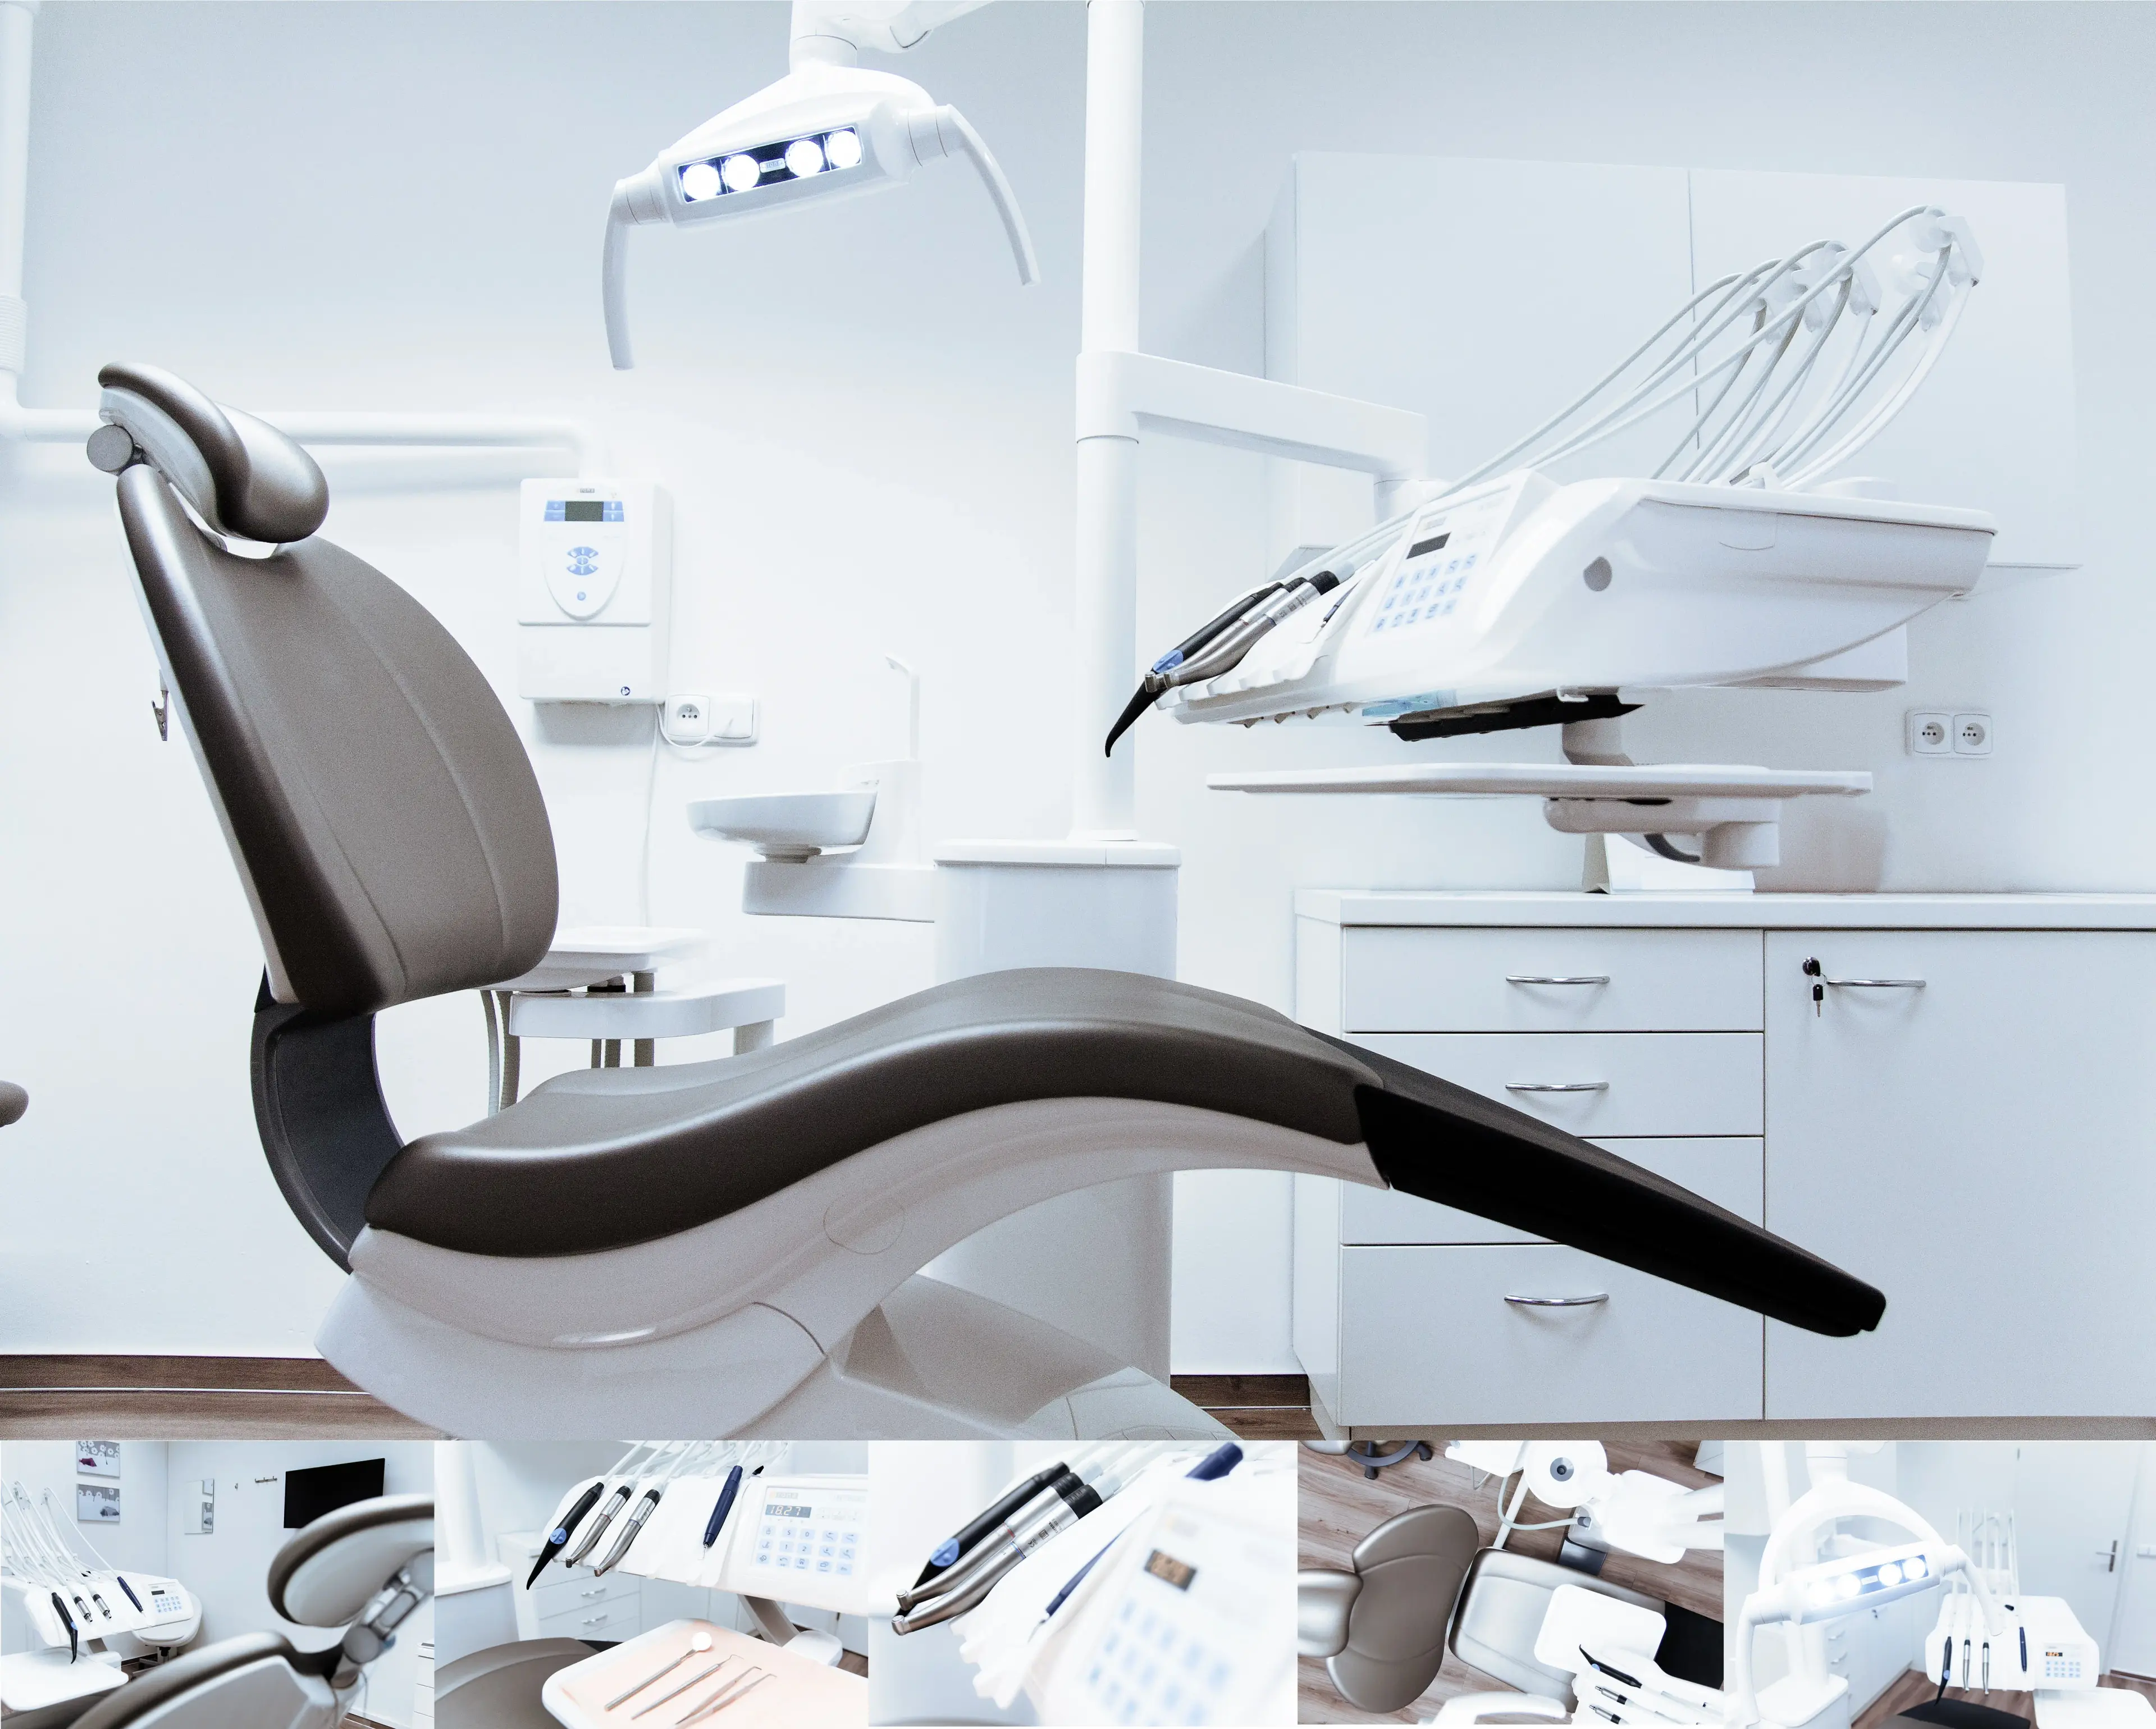 White Dental office ready for preparatory treatments for before a dental implants procedure